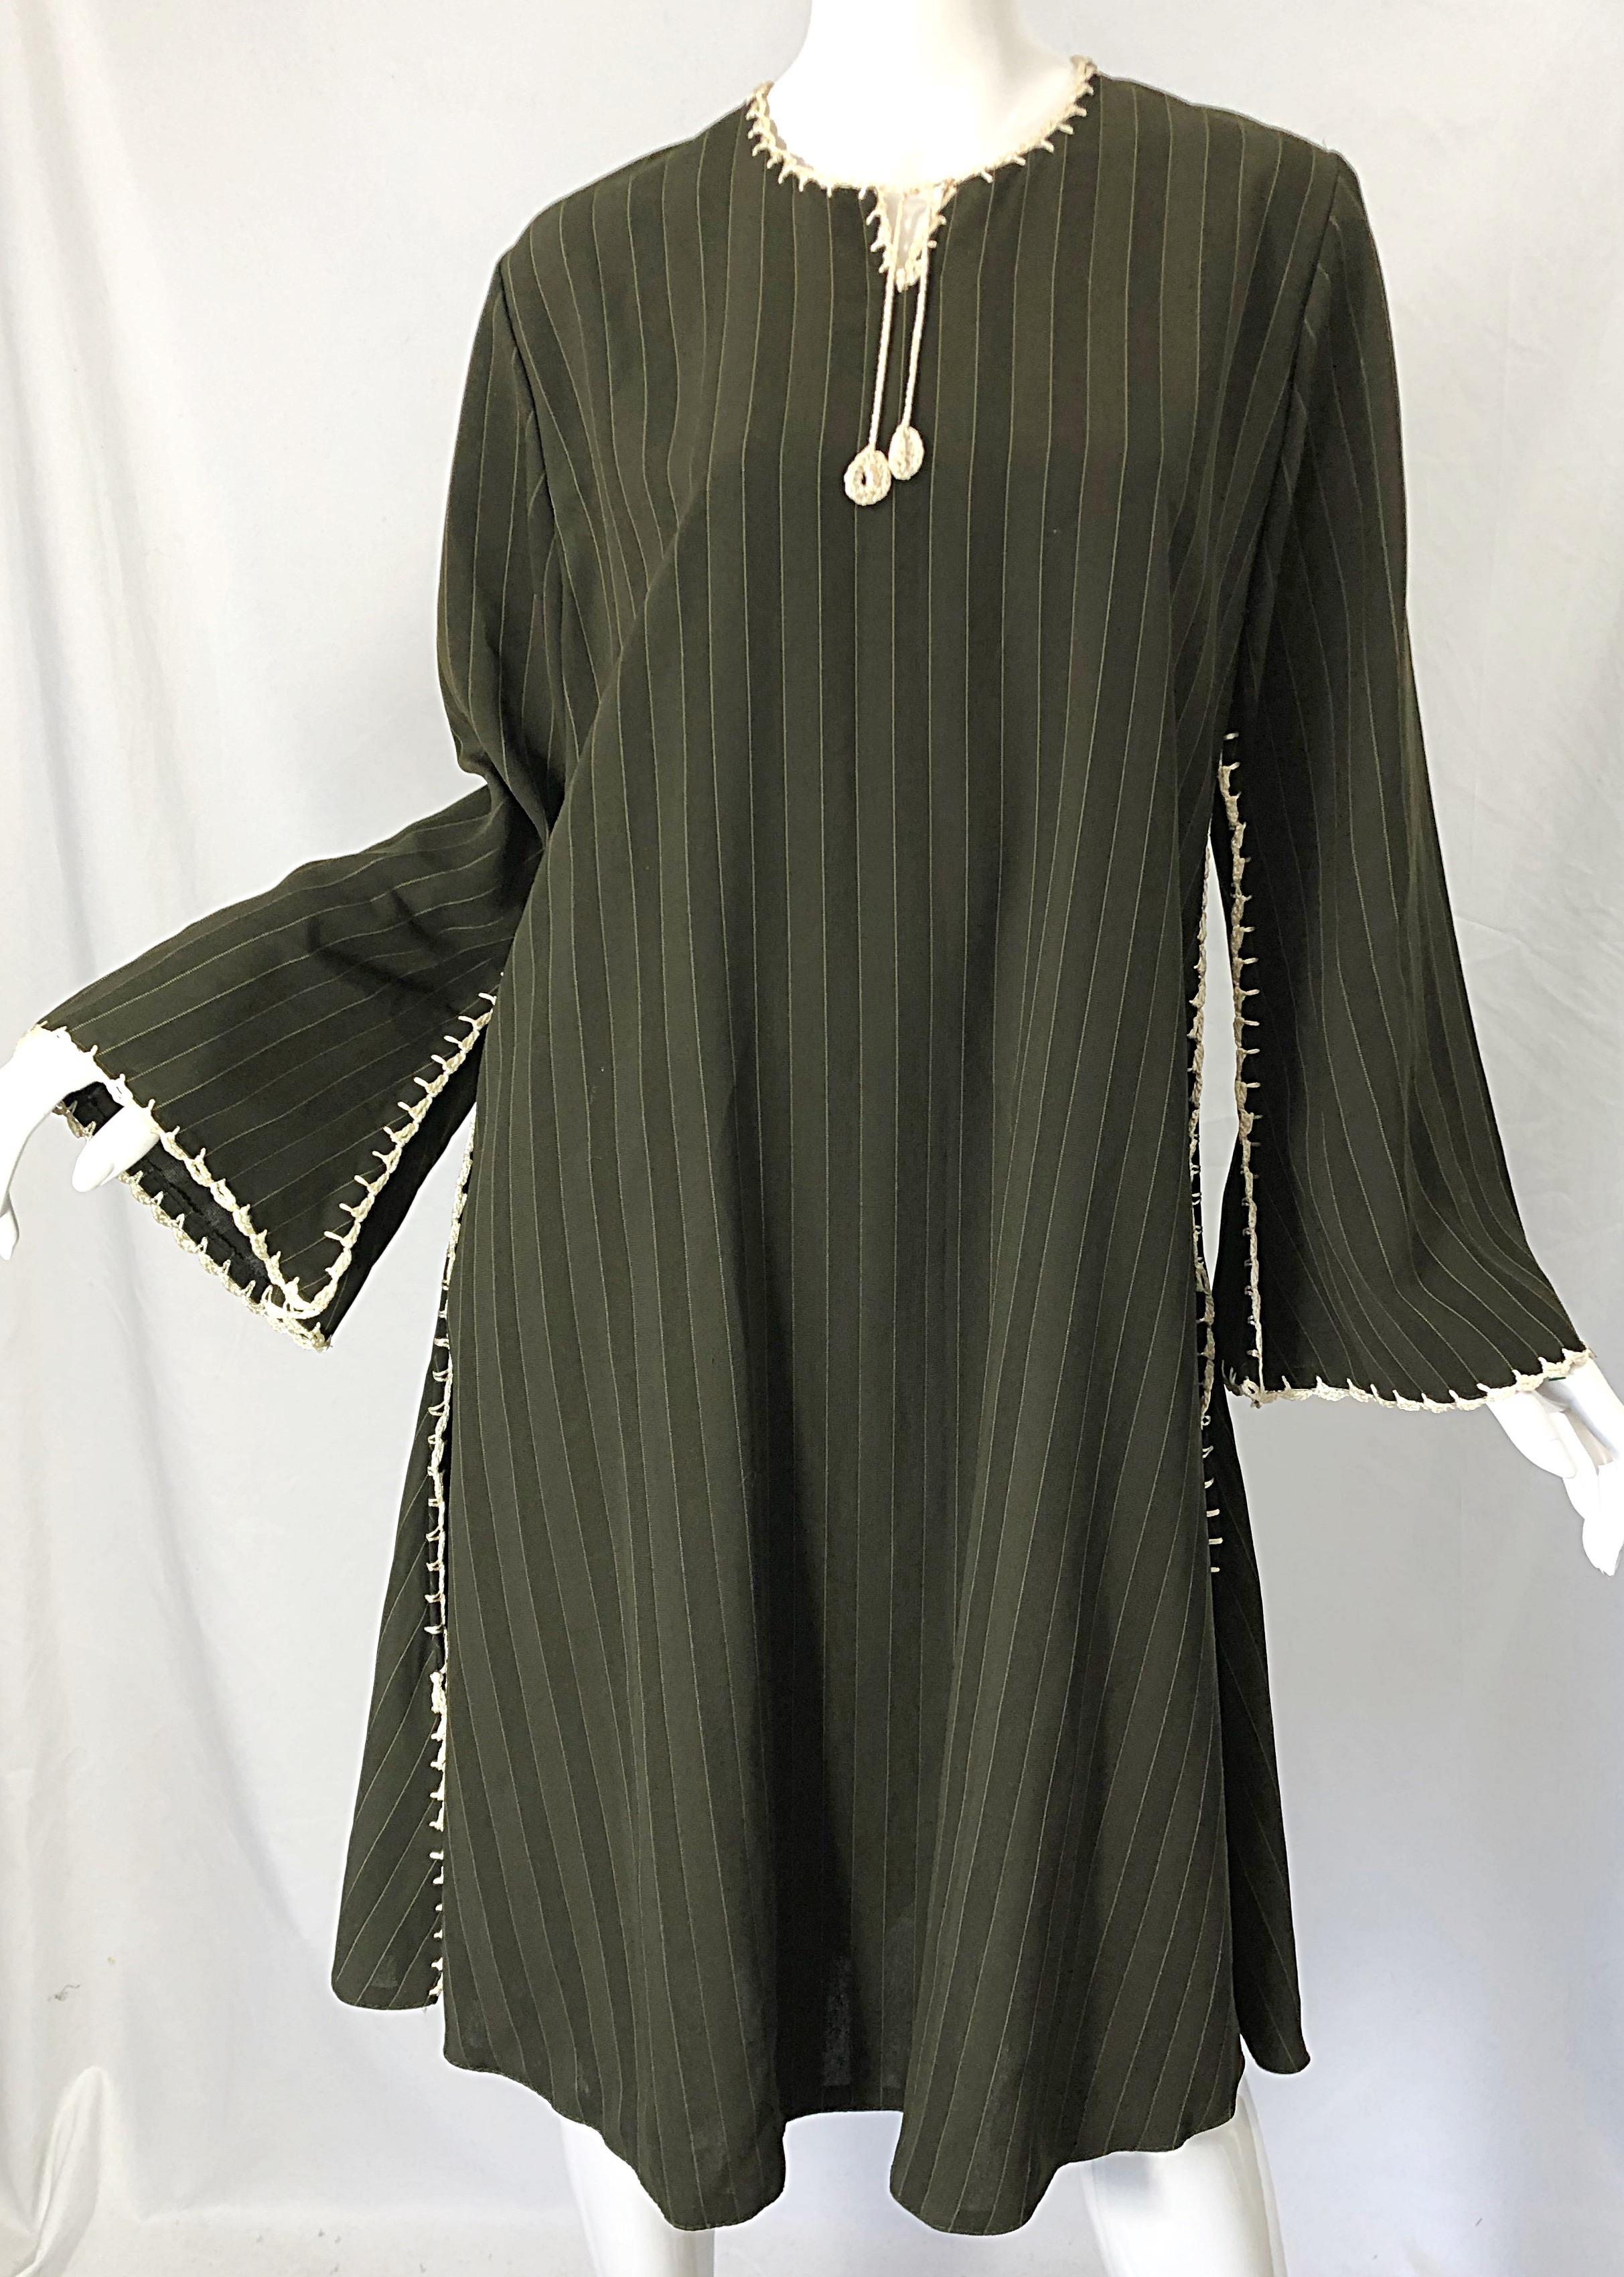 Chic 1970s hunter green, brown and ivory pinstriped crochet bell sleeve tunic dress ! Features hand crochet work down the sides of the dress, collar, and sleeves. Simply slips over the head. Great alone, or as a cover up with leggings. 
In great